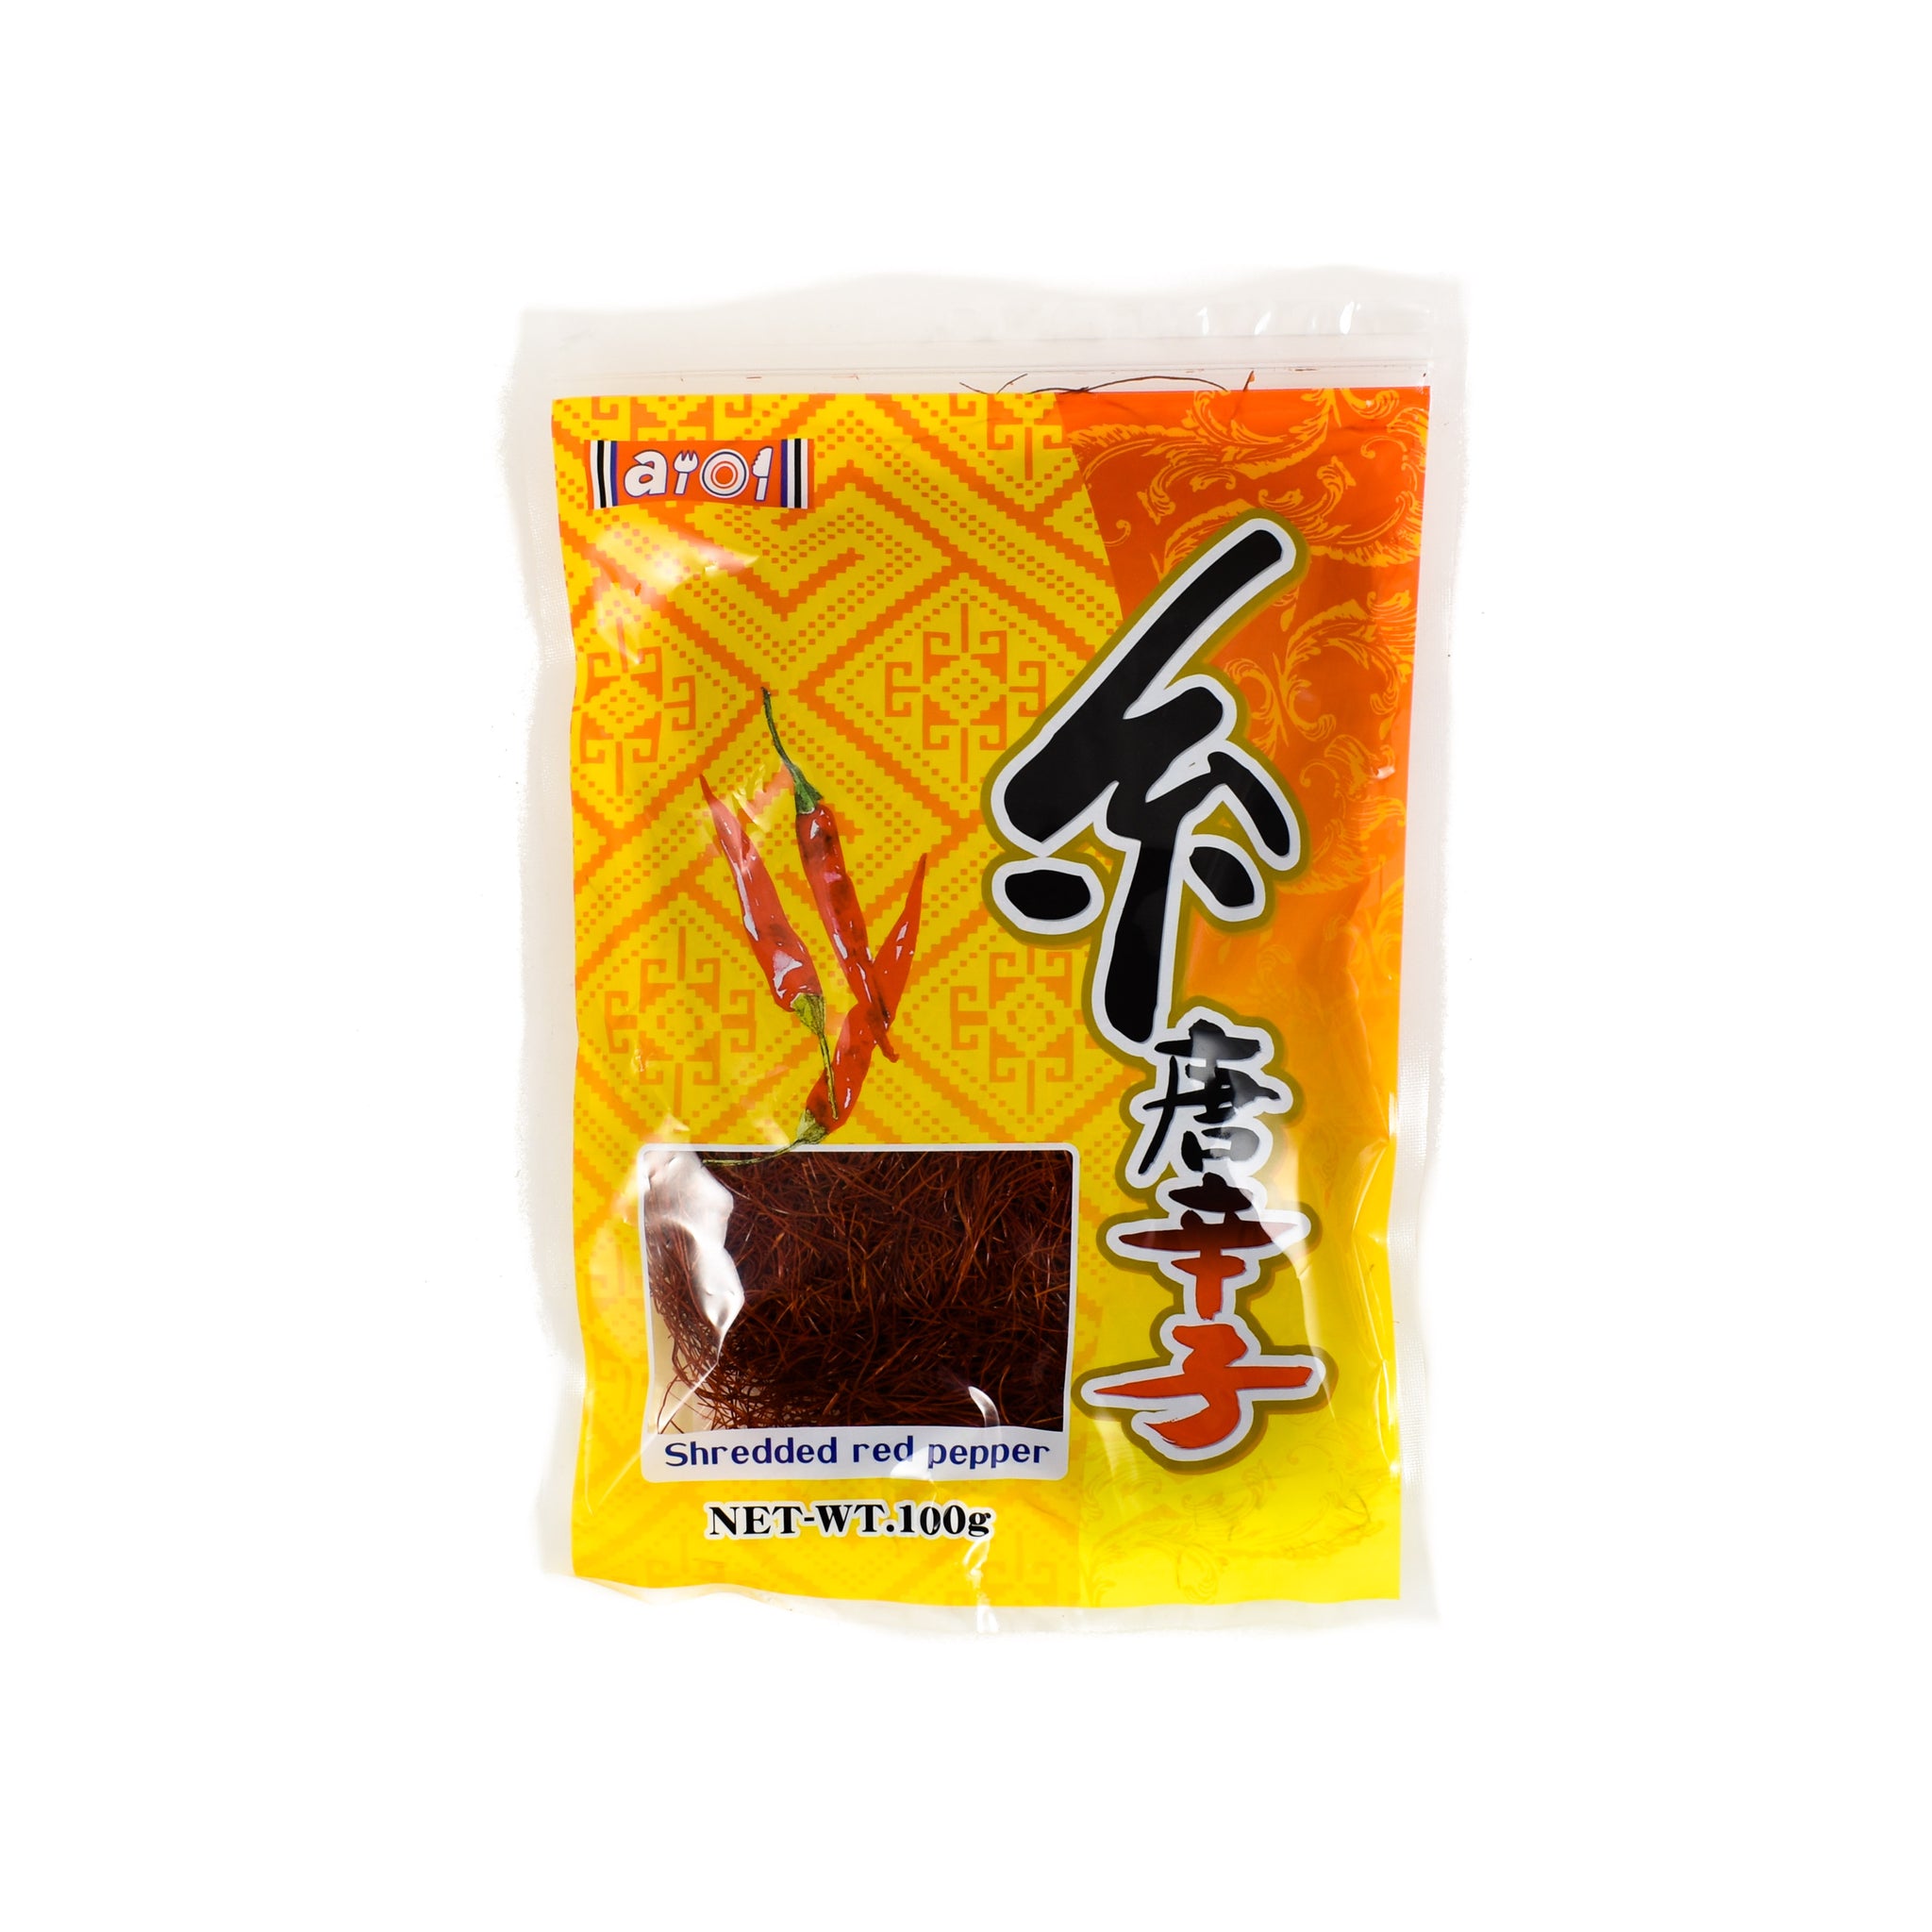 S&B Ito Togarashi - Sil Gochu 100g Ingredients Herbs & Spices Dried Chillies Japanese Food